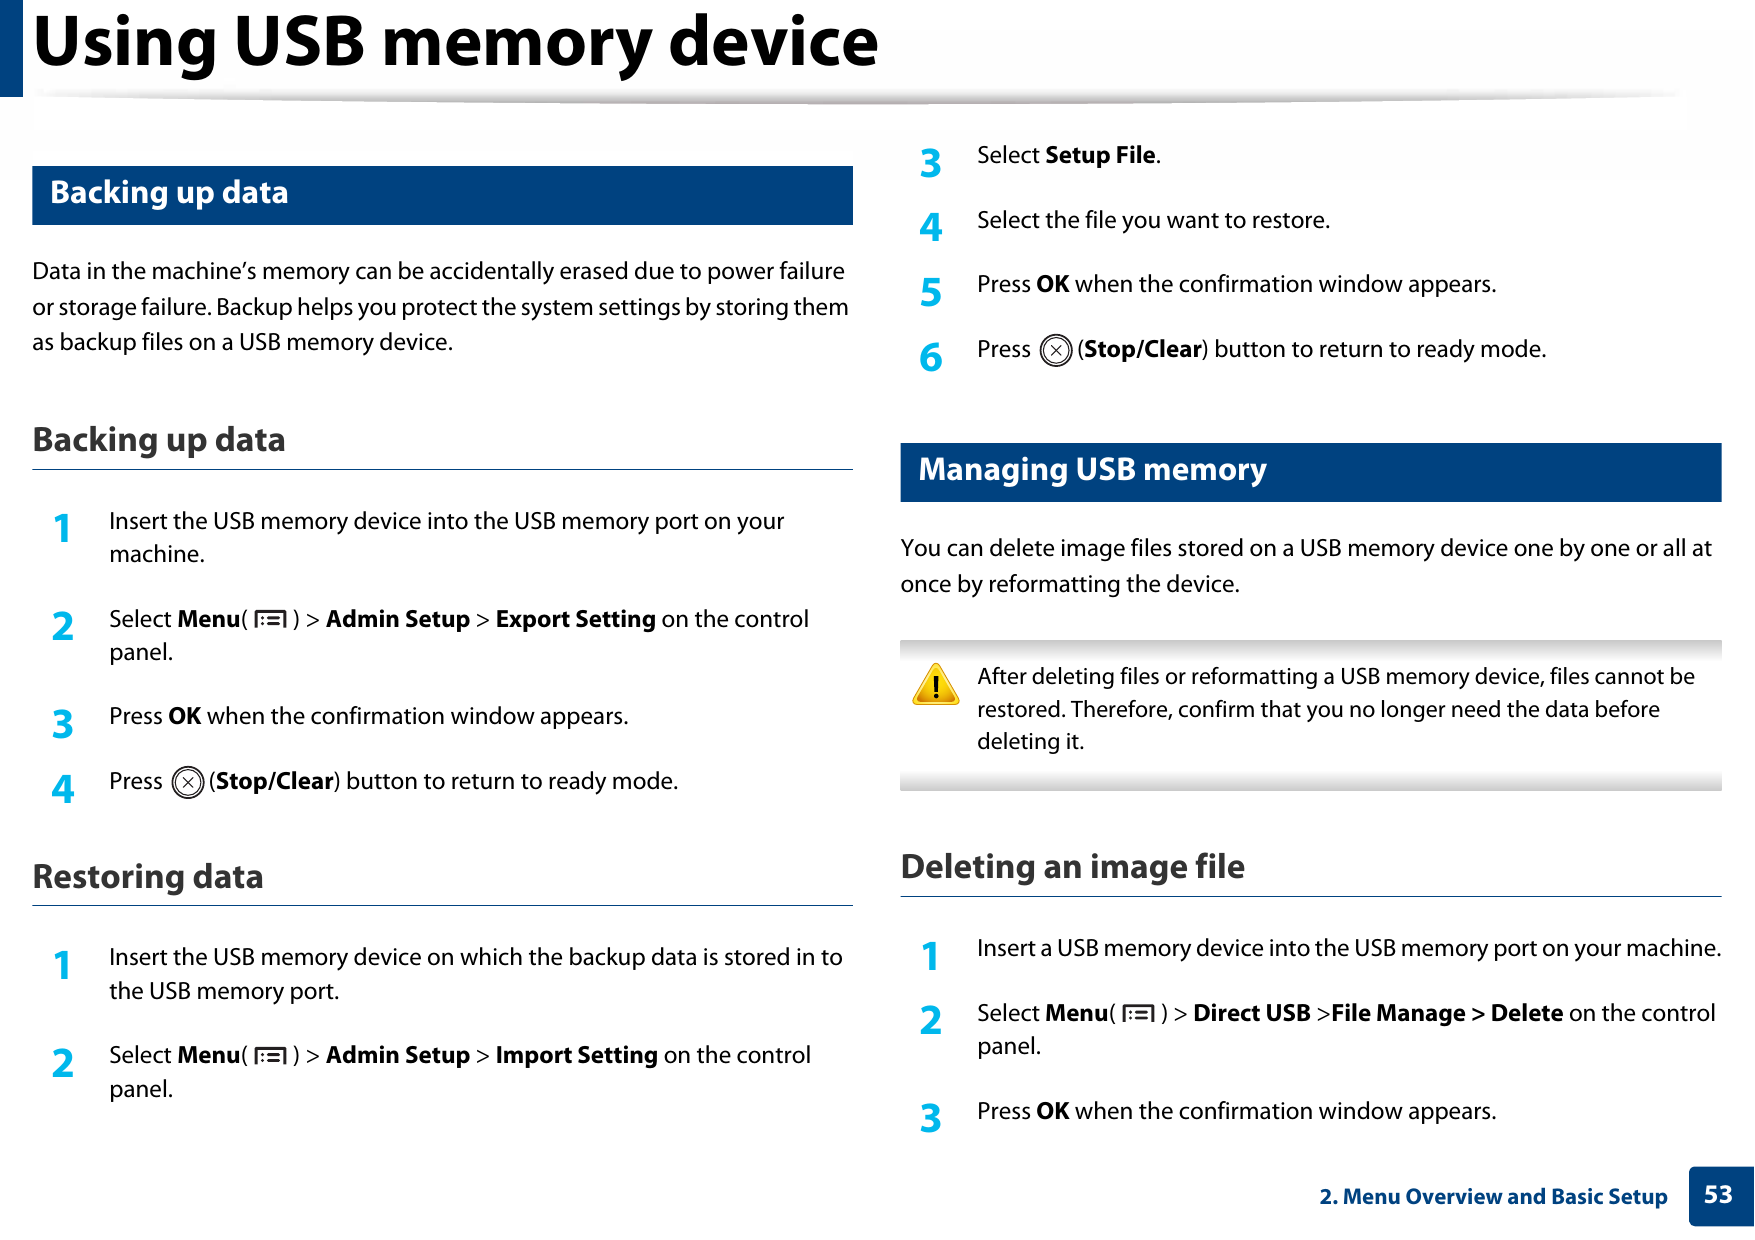 Using USB memory device532. Menu Overview and Basic Setup15 Backing up data Data in the machine’s memory can be accidentally erased due to power failure or storage failure. Backup helps you protect the system settings by storing them as backup files on a USB memory device.Backing up data1Insert the USB memory device into the USB memory port on your machine.2  Select Menu() &gt; Admin Setup &gt; Export Setting on the control panel.3  Press OK when the confirmation window appears.4  Press (Stop/Clear) button to return to ready mode.Restoring data1Insert the USB memory device on which the backup data is stored in to the USB memory port.2  Select Menu() &gt; Admin Setup &gt; Import Setting on the control panel.3  Select Setup File.4  Select the file you want to restore.5  Press OK when the confirmation window appears.6  Press (Stop/Clear) button to return to ready mode.16 Managing USB memoryYou can delete image files stored on a USB memory device one by one or all at once by reformatting the device. After deleting files or reformatting a USB memory device, files cannot be restored. Therefore, confirm that you no longer need the data before deleting it. Deleting an image file1Insert a USB memory device into the USB memory port on your machine.2  Select Menu() &gt; Direct USB &gt;File Manage &gt; Delete on the control panel.3  Press OK when the confirmation window appears.